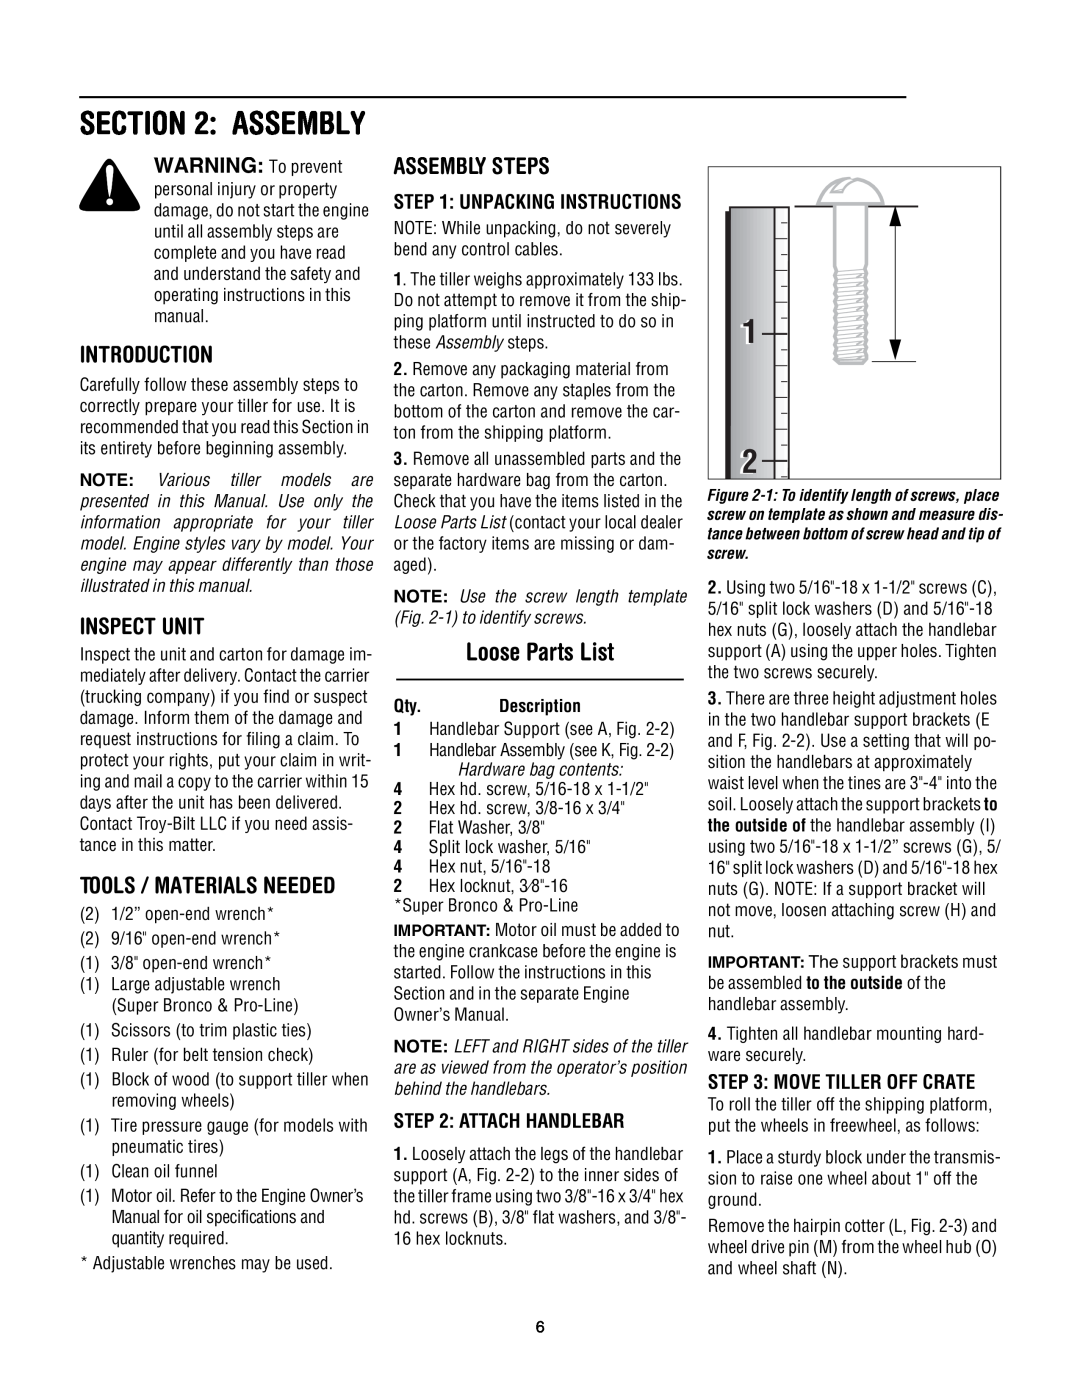 Troy-Bilt Super Bronco manual Loose Parts List, Introduction, Inspect Unit, Assembly Steps, Tools / Materials Needed 